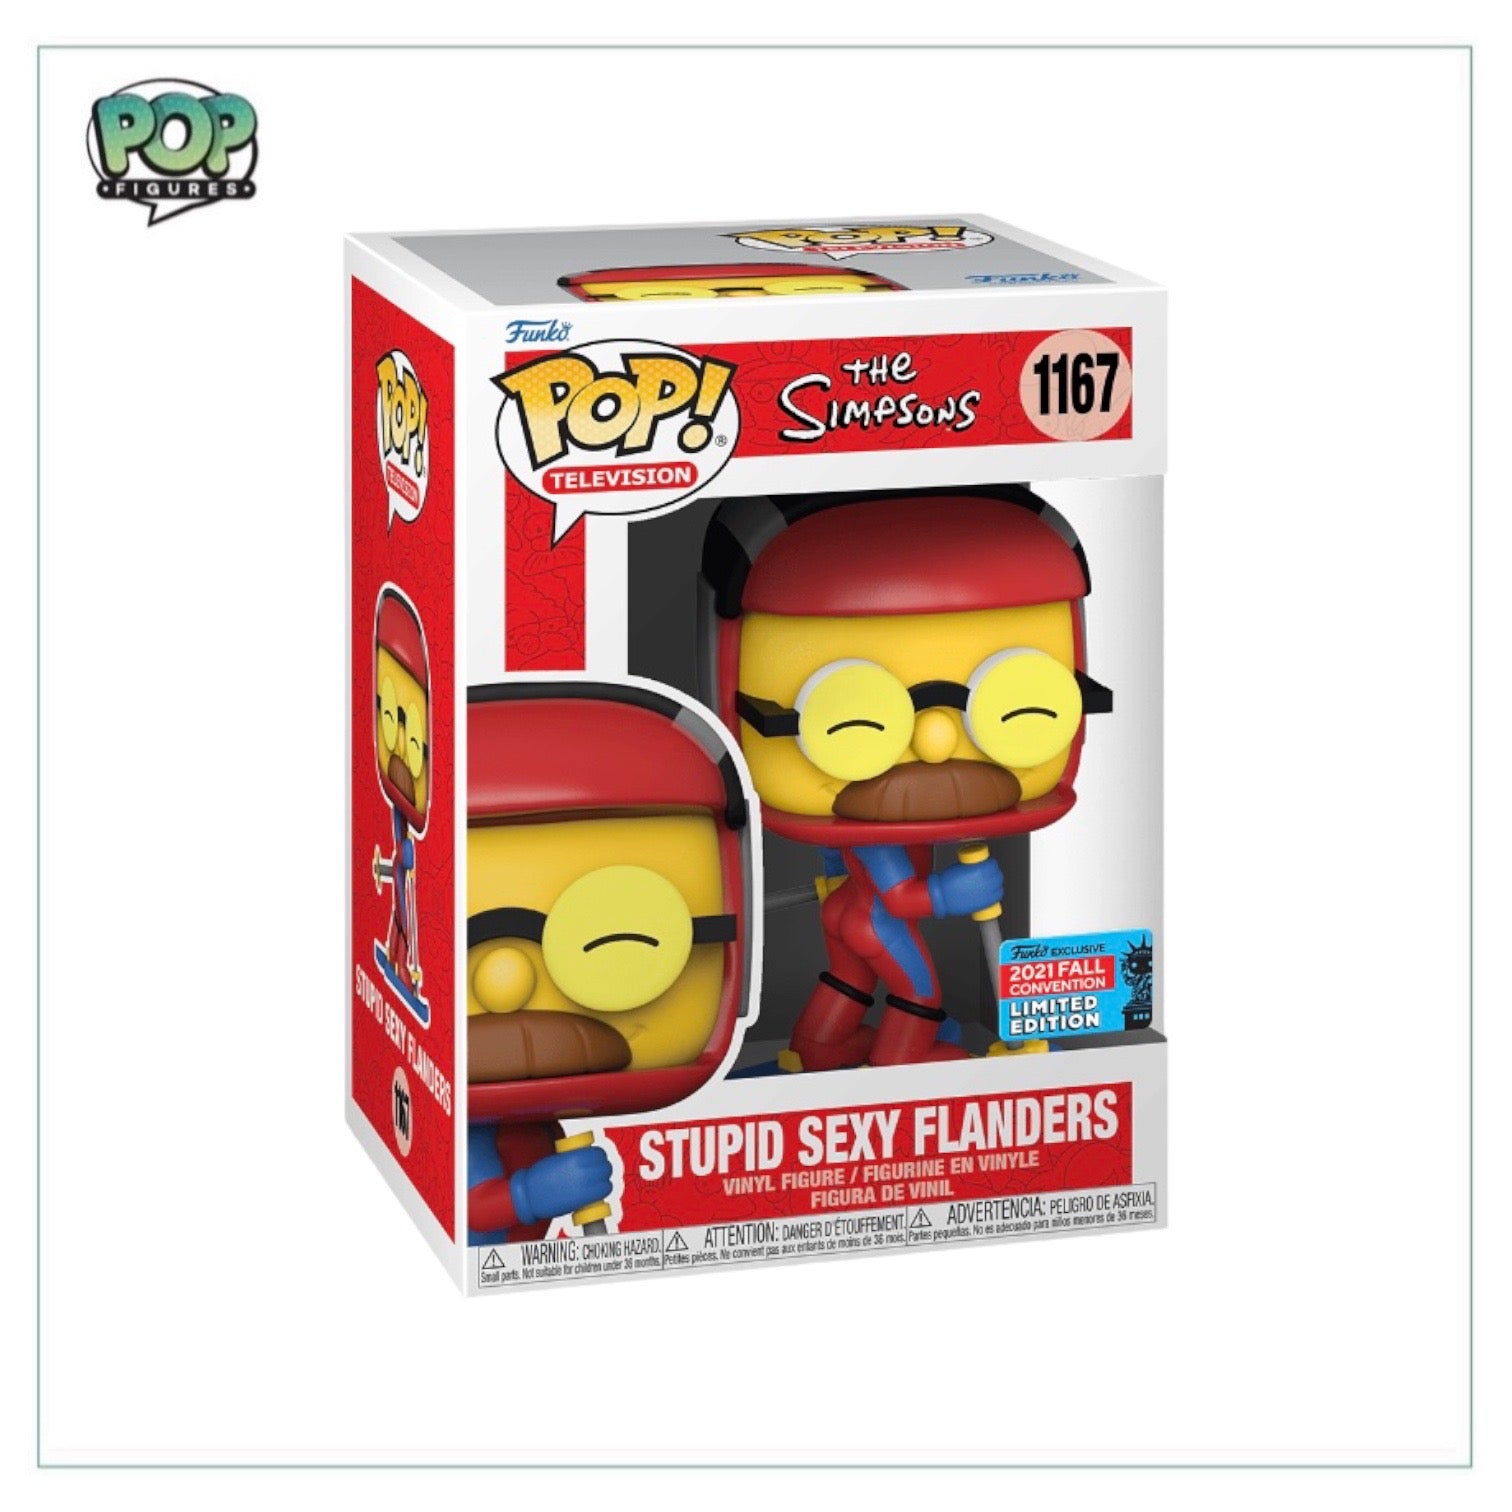 Stupid Sexy Flanders #1167 Funko Pop! - The Simpsons - NYCC 2021 Shared Exclusive